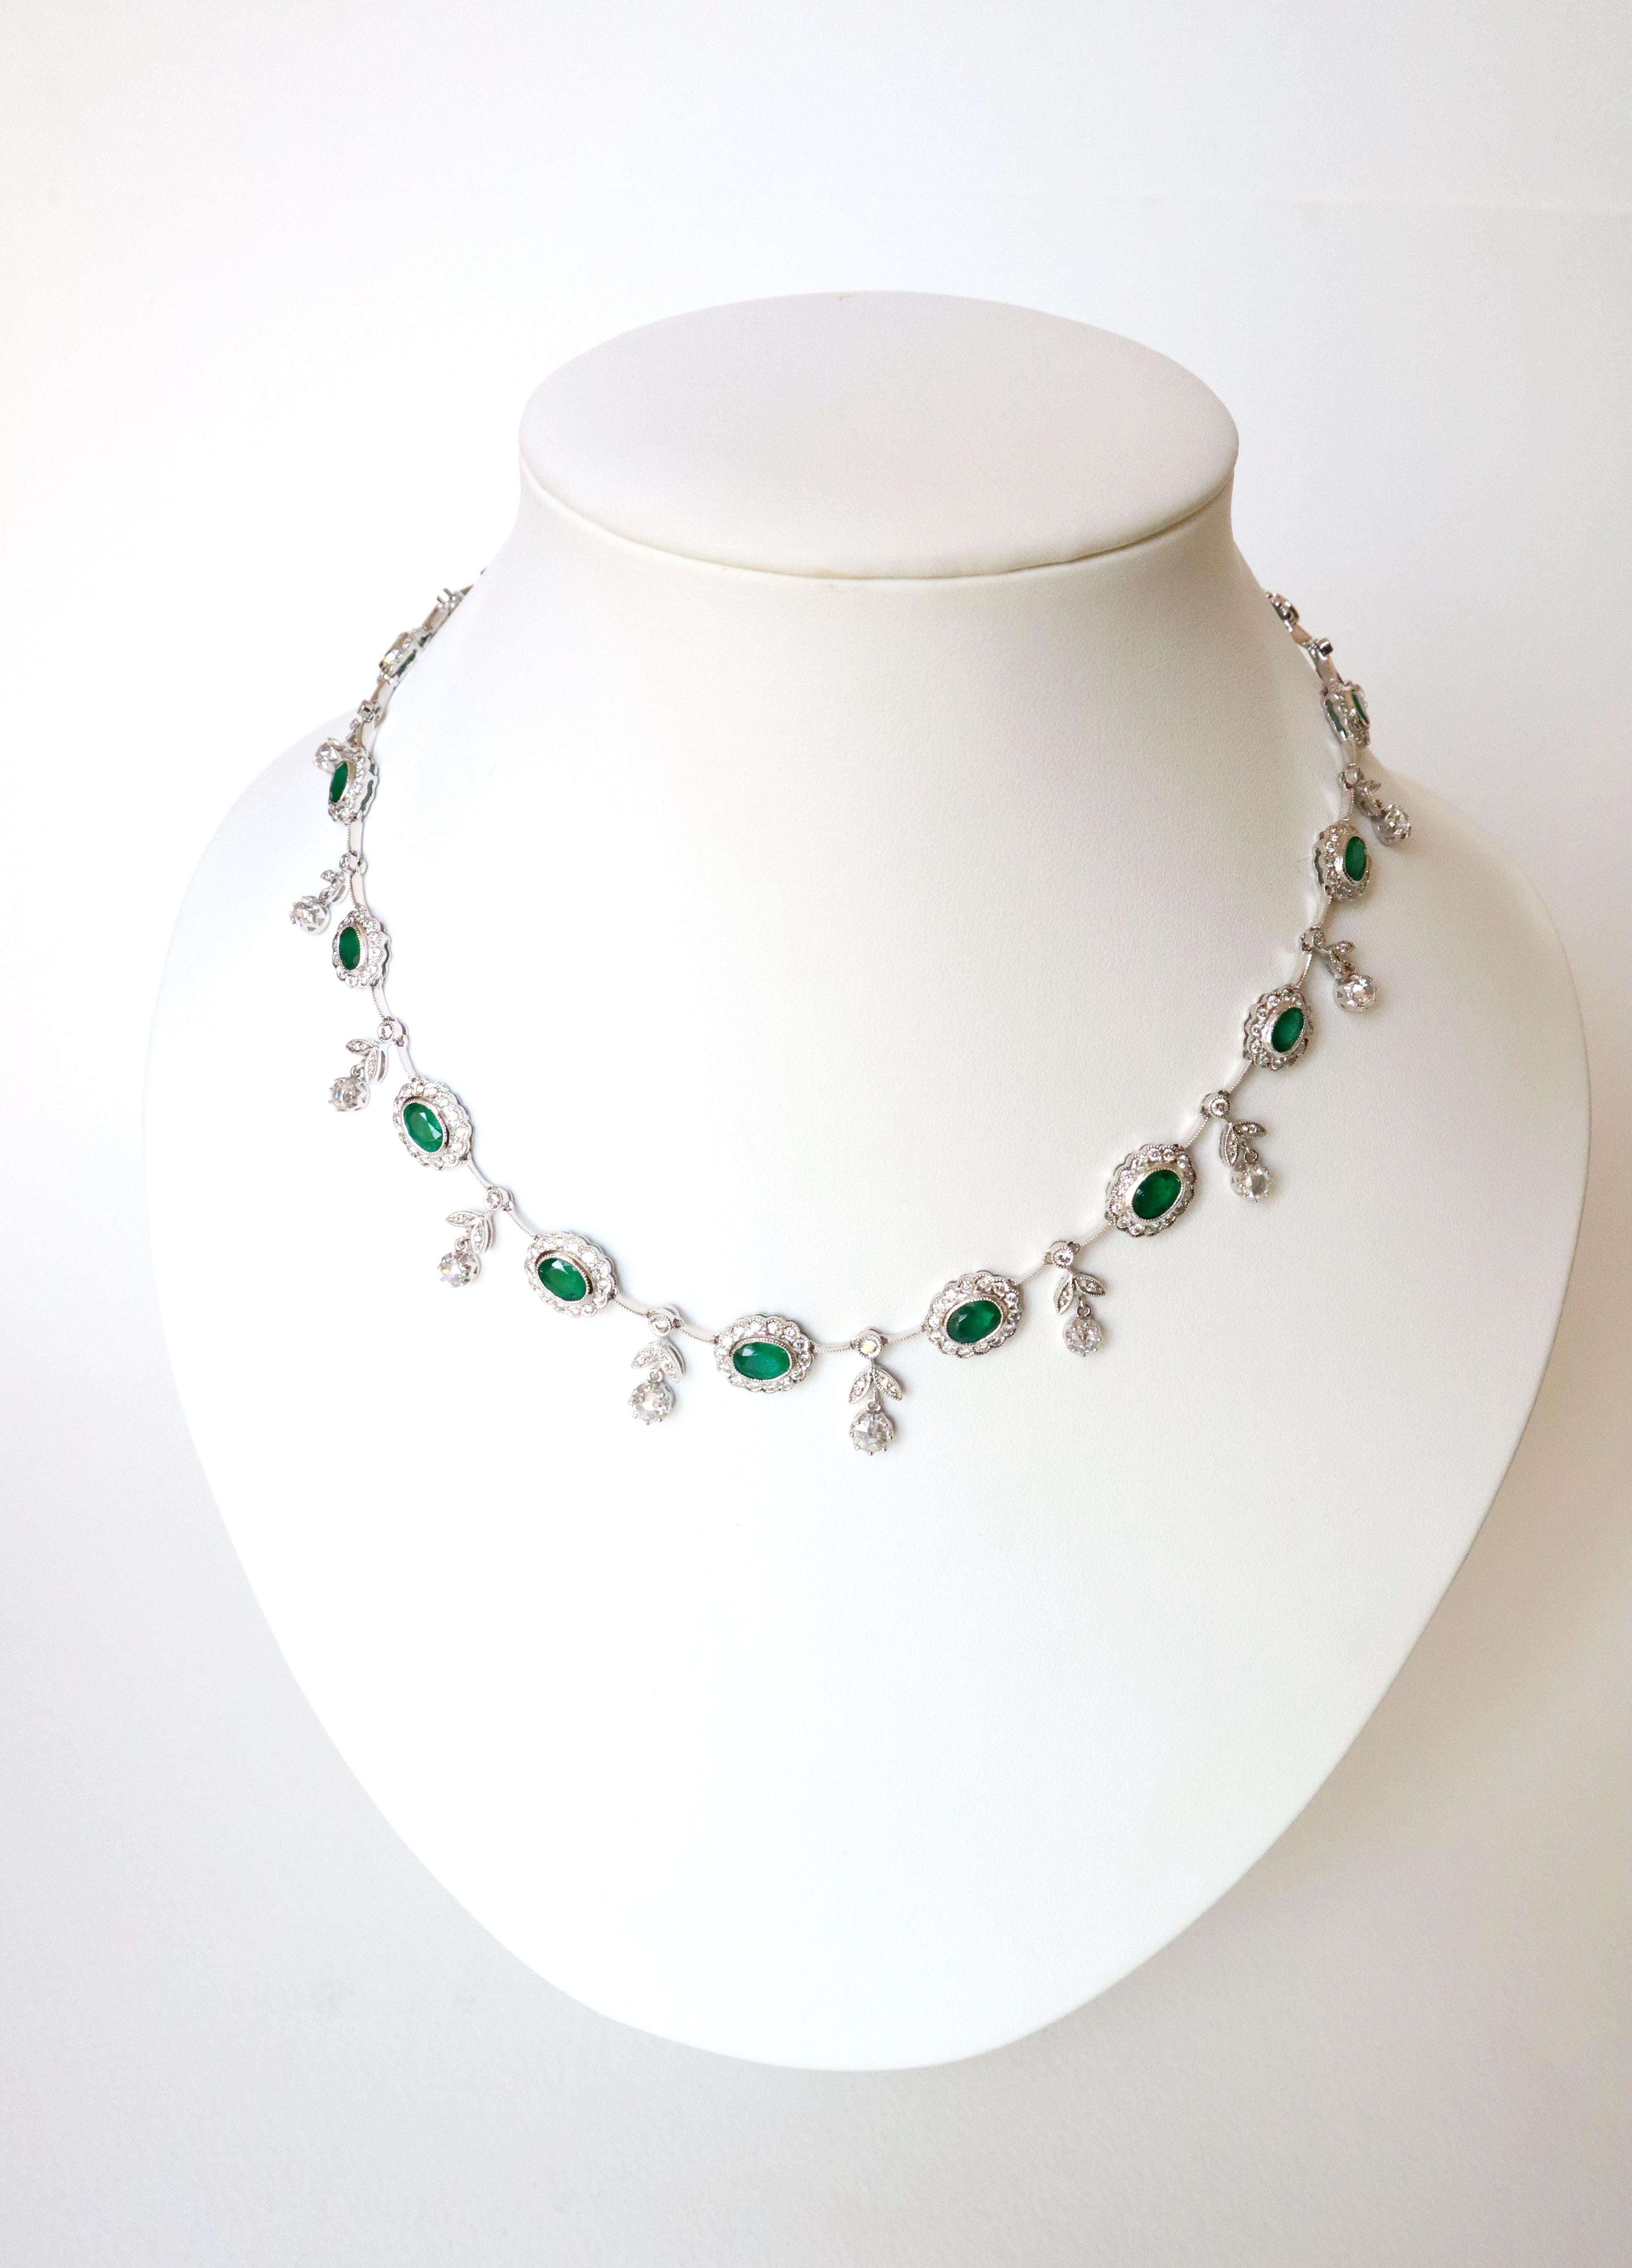 Drapery necklace in 18 karat white gold, emeralds and diamonds. It is made up of 17 pompadour motifs, each closed setting an emerald surrounded by diamonds. The motifs are linked together by 2 finely chiseled articulated rods linked together by a